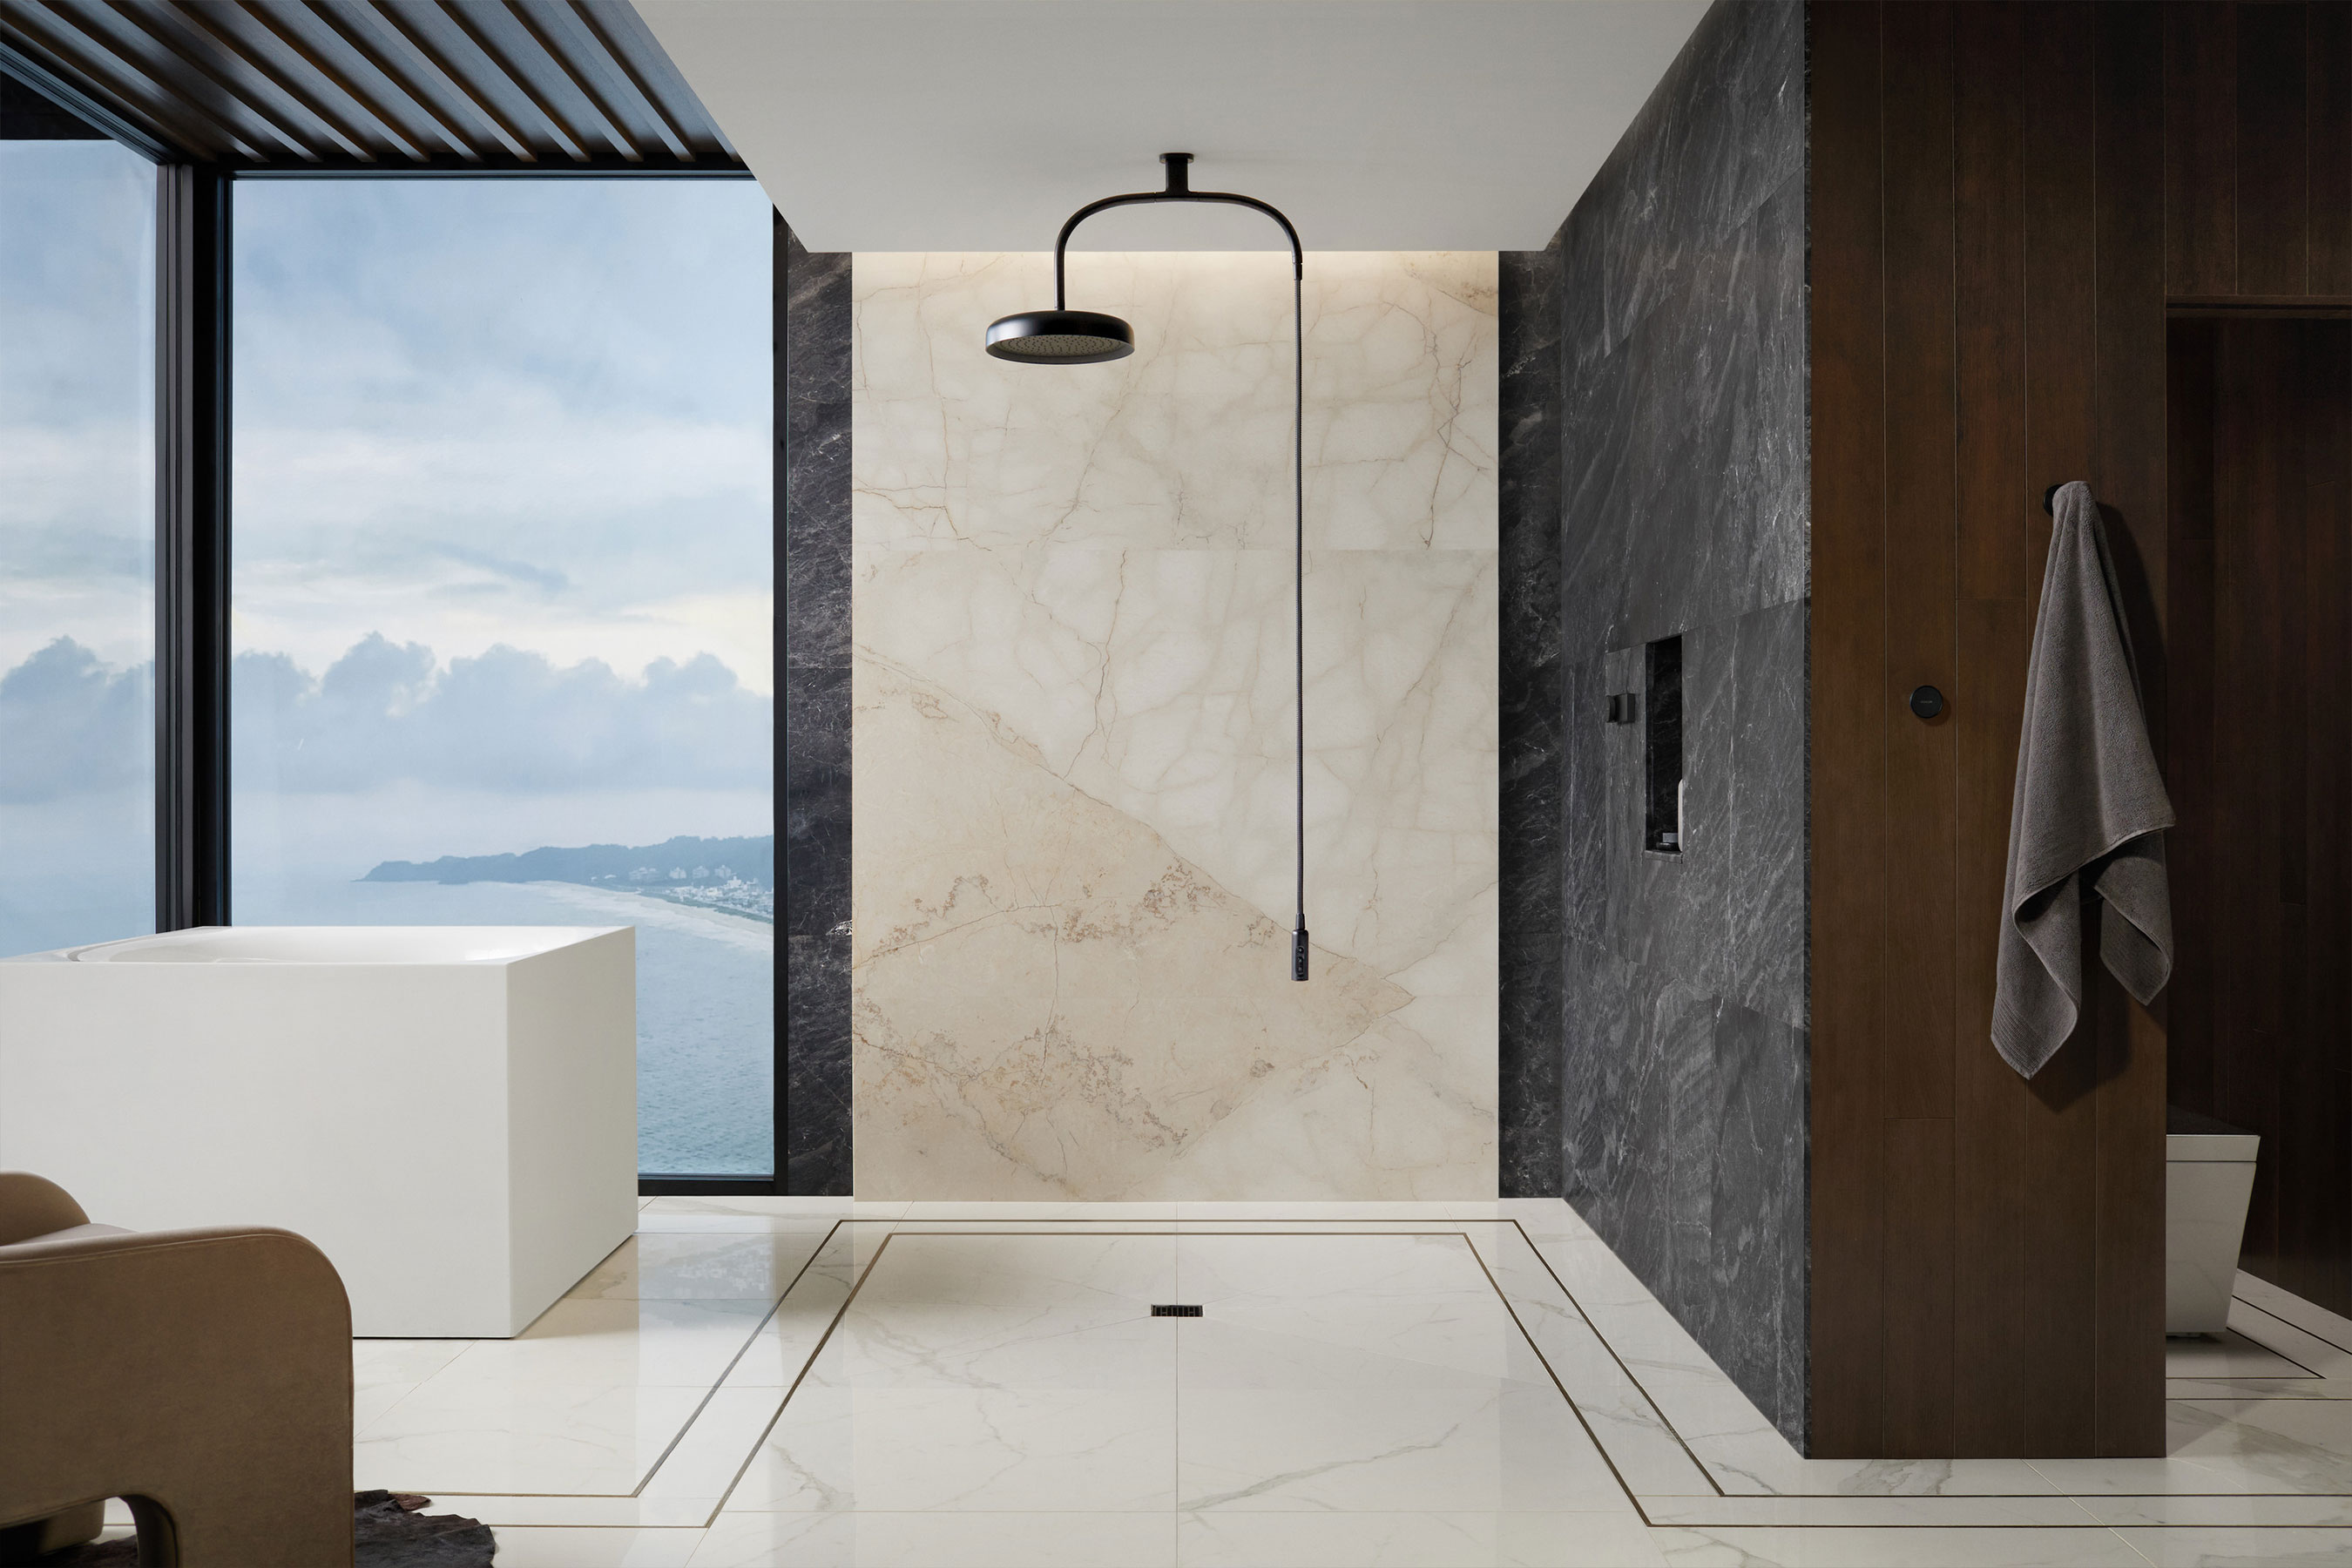 KOHLER Statement showering collection and Anthem valves and controls offer seamless global specification and unbridled creativity